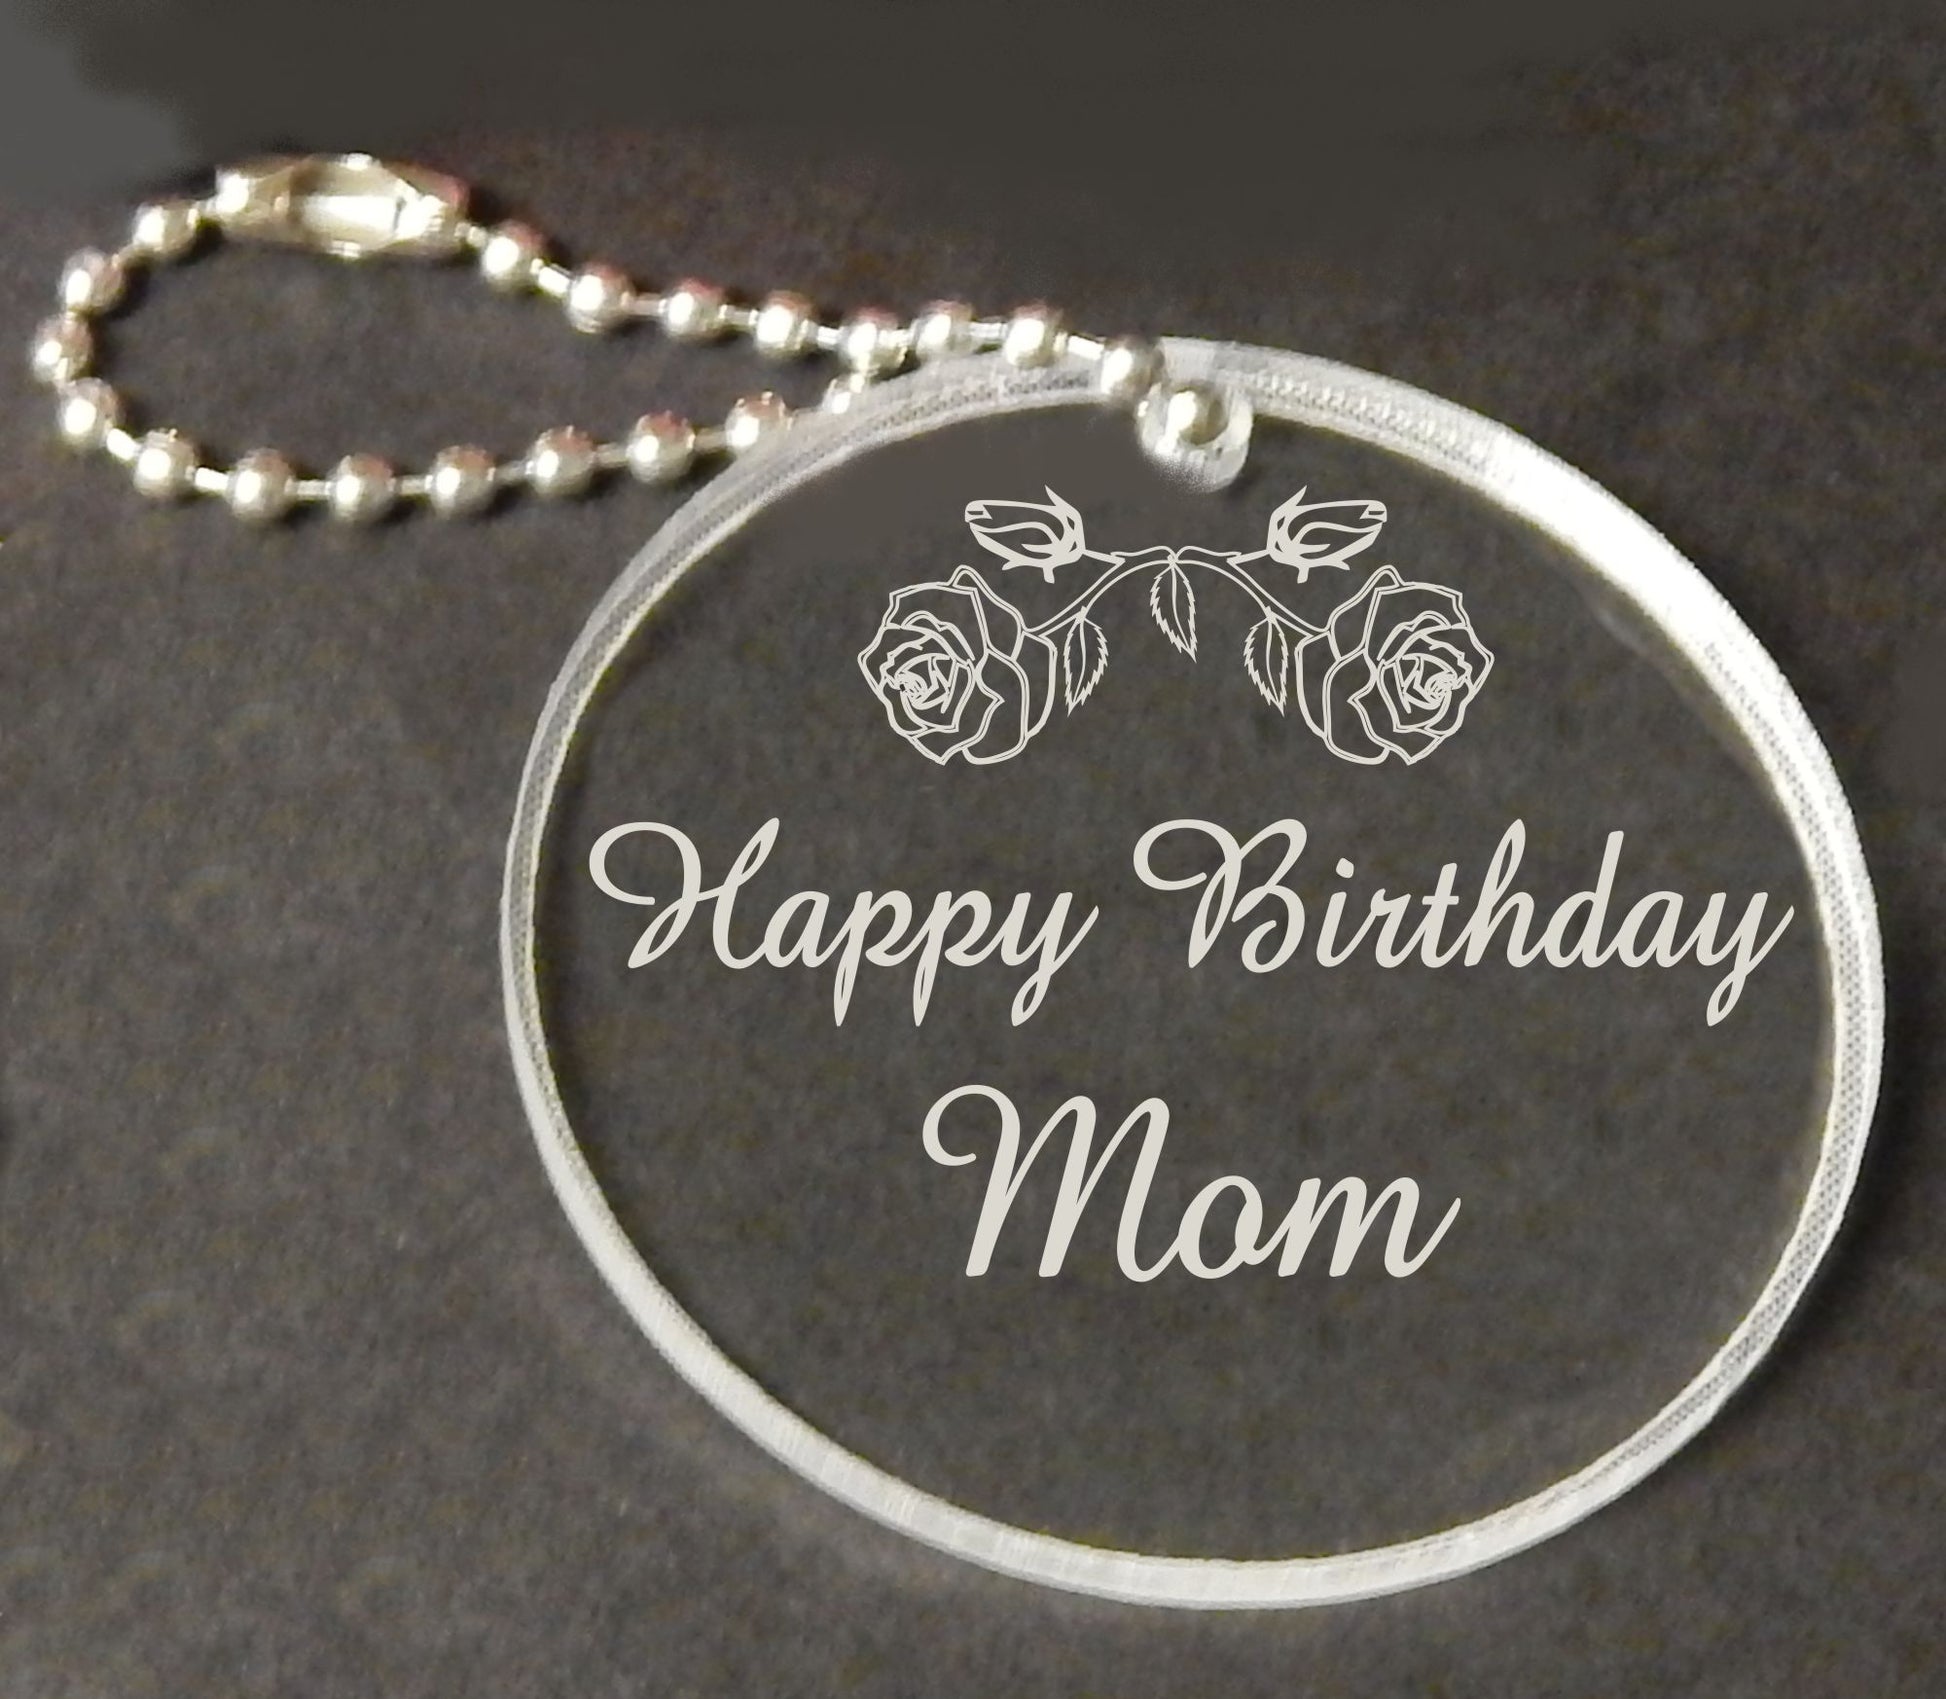 acrylic round keychain favor engraved with a rose design and attached to a small chain